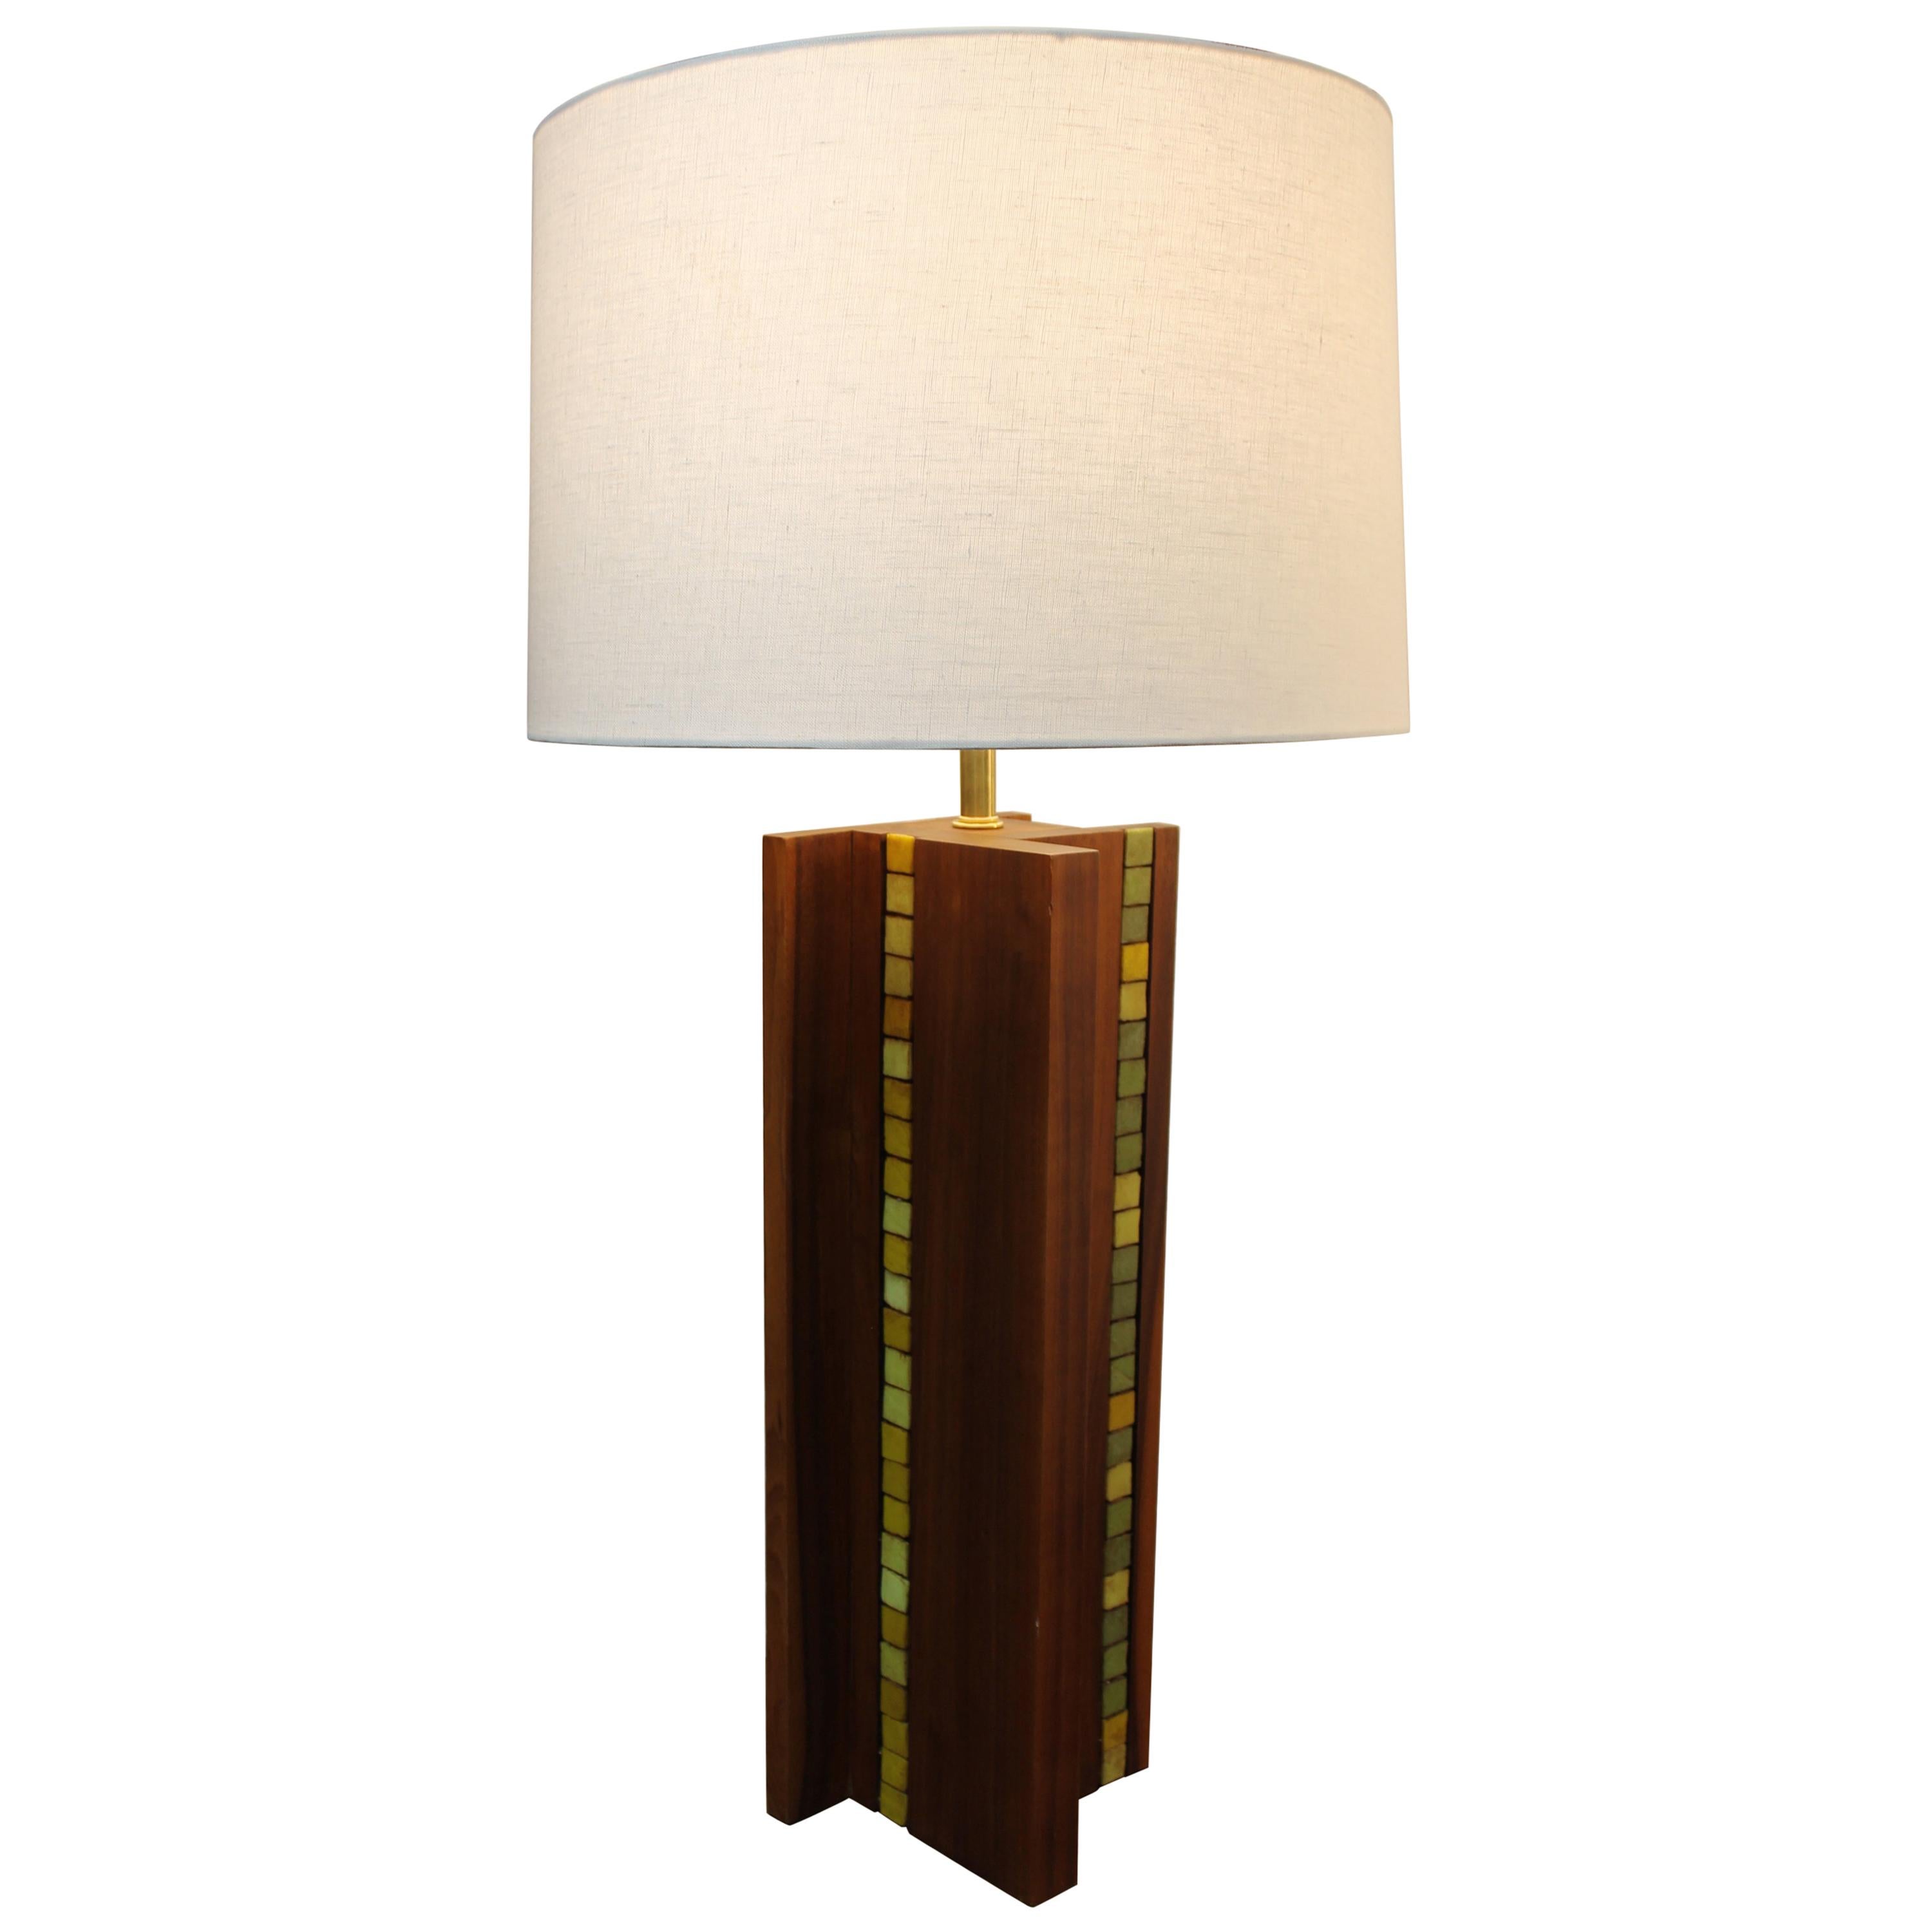 Tile and Wood Lamp in the Style of Martz